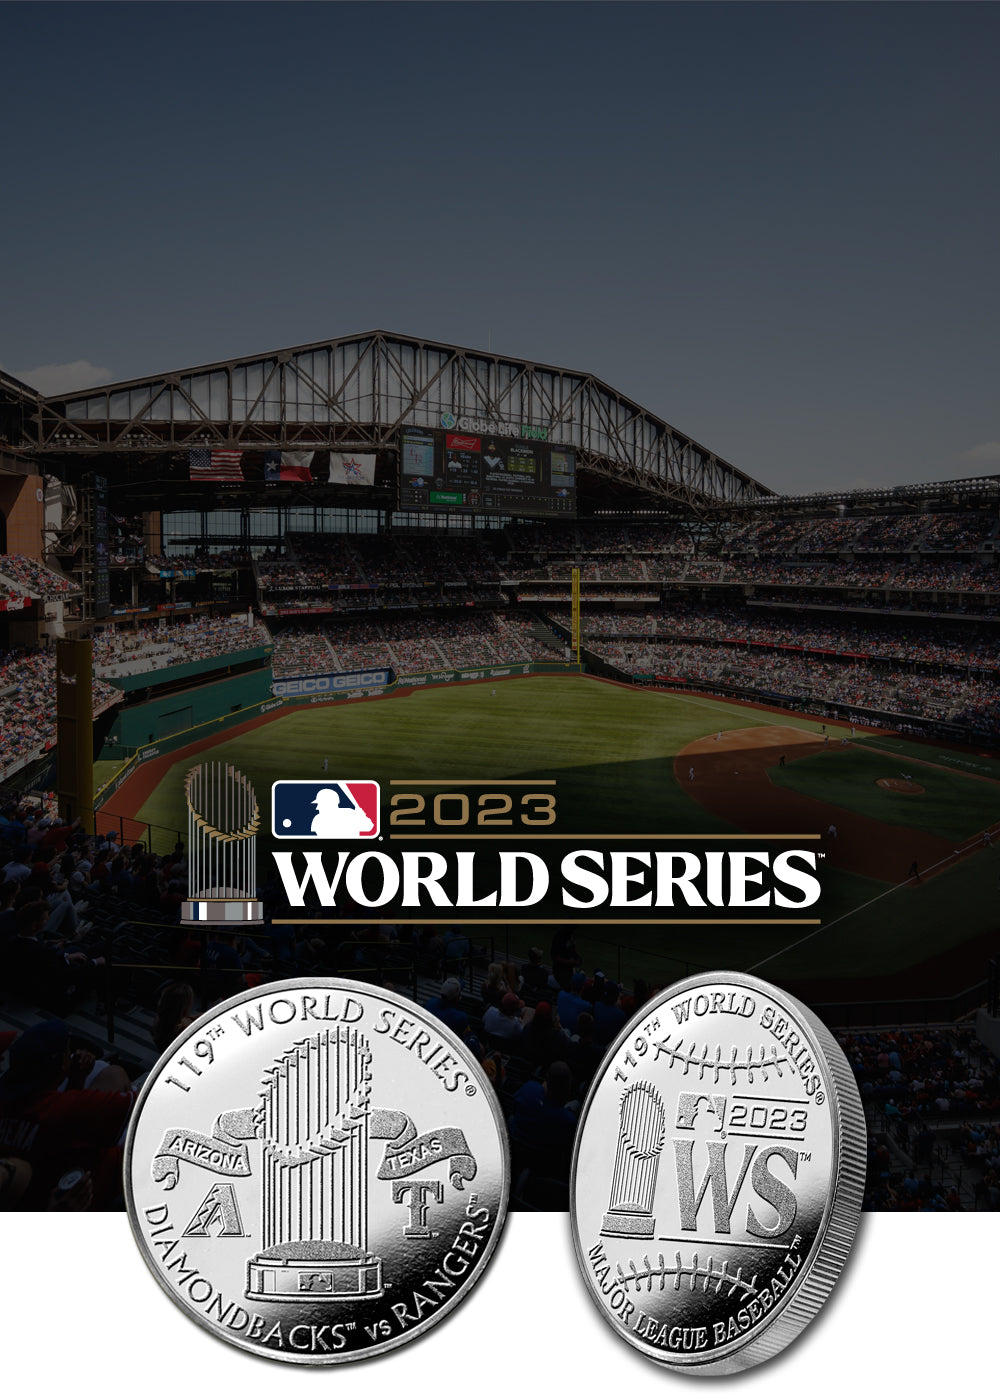 Chicago Cubs 2016 World Series Champions Celebration Bronze Coin Photo Mint